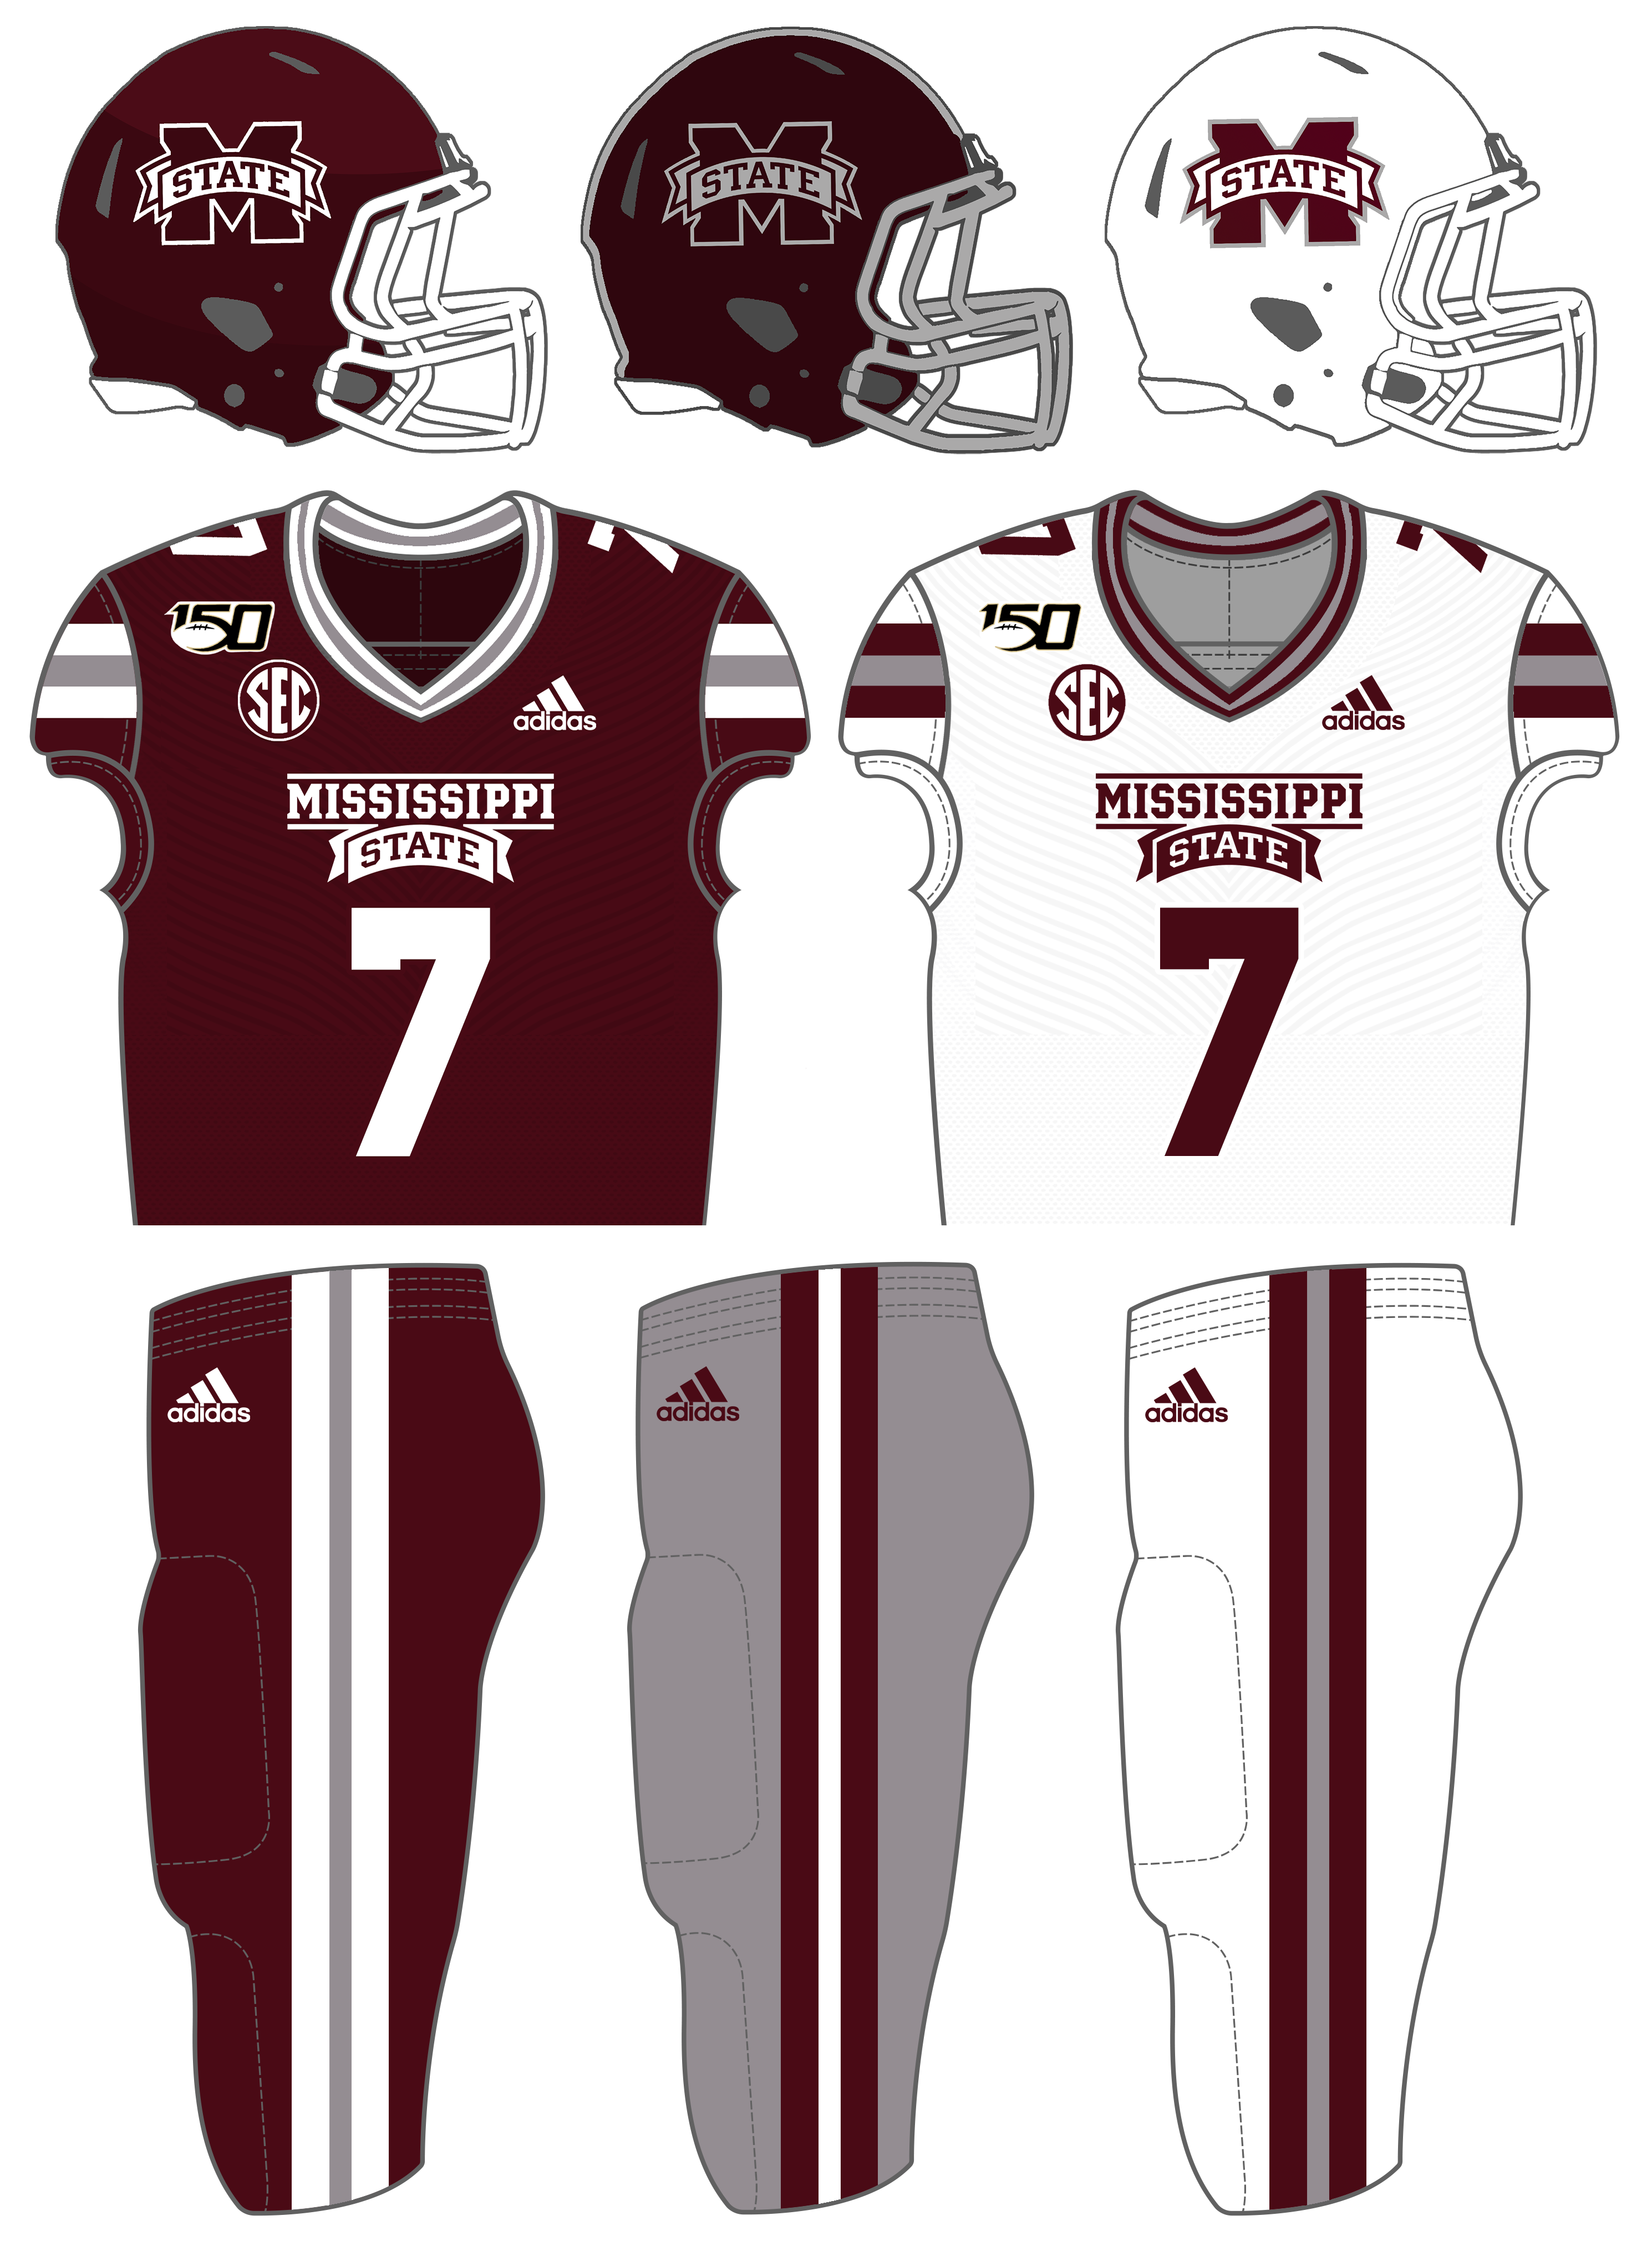 Mississippi State Football Uniforms 